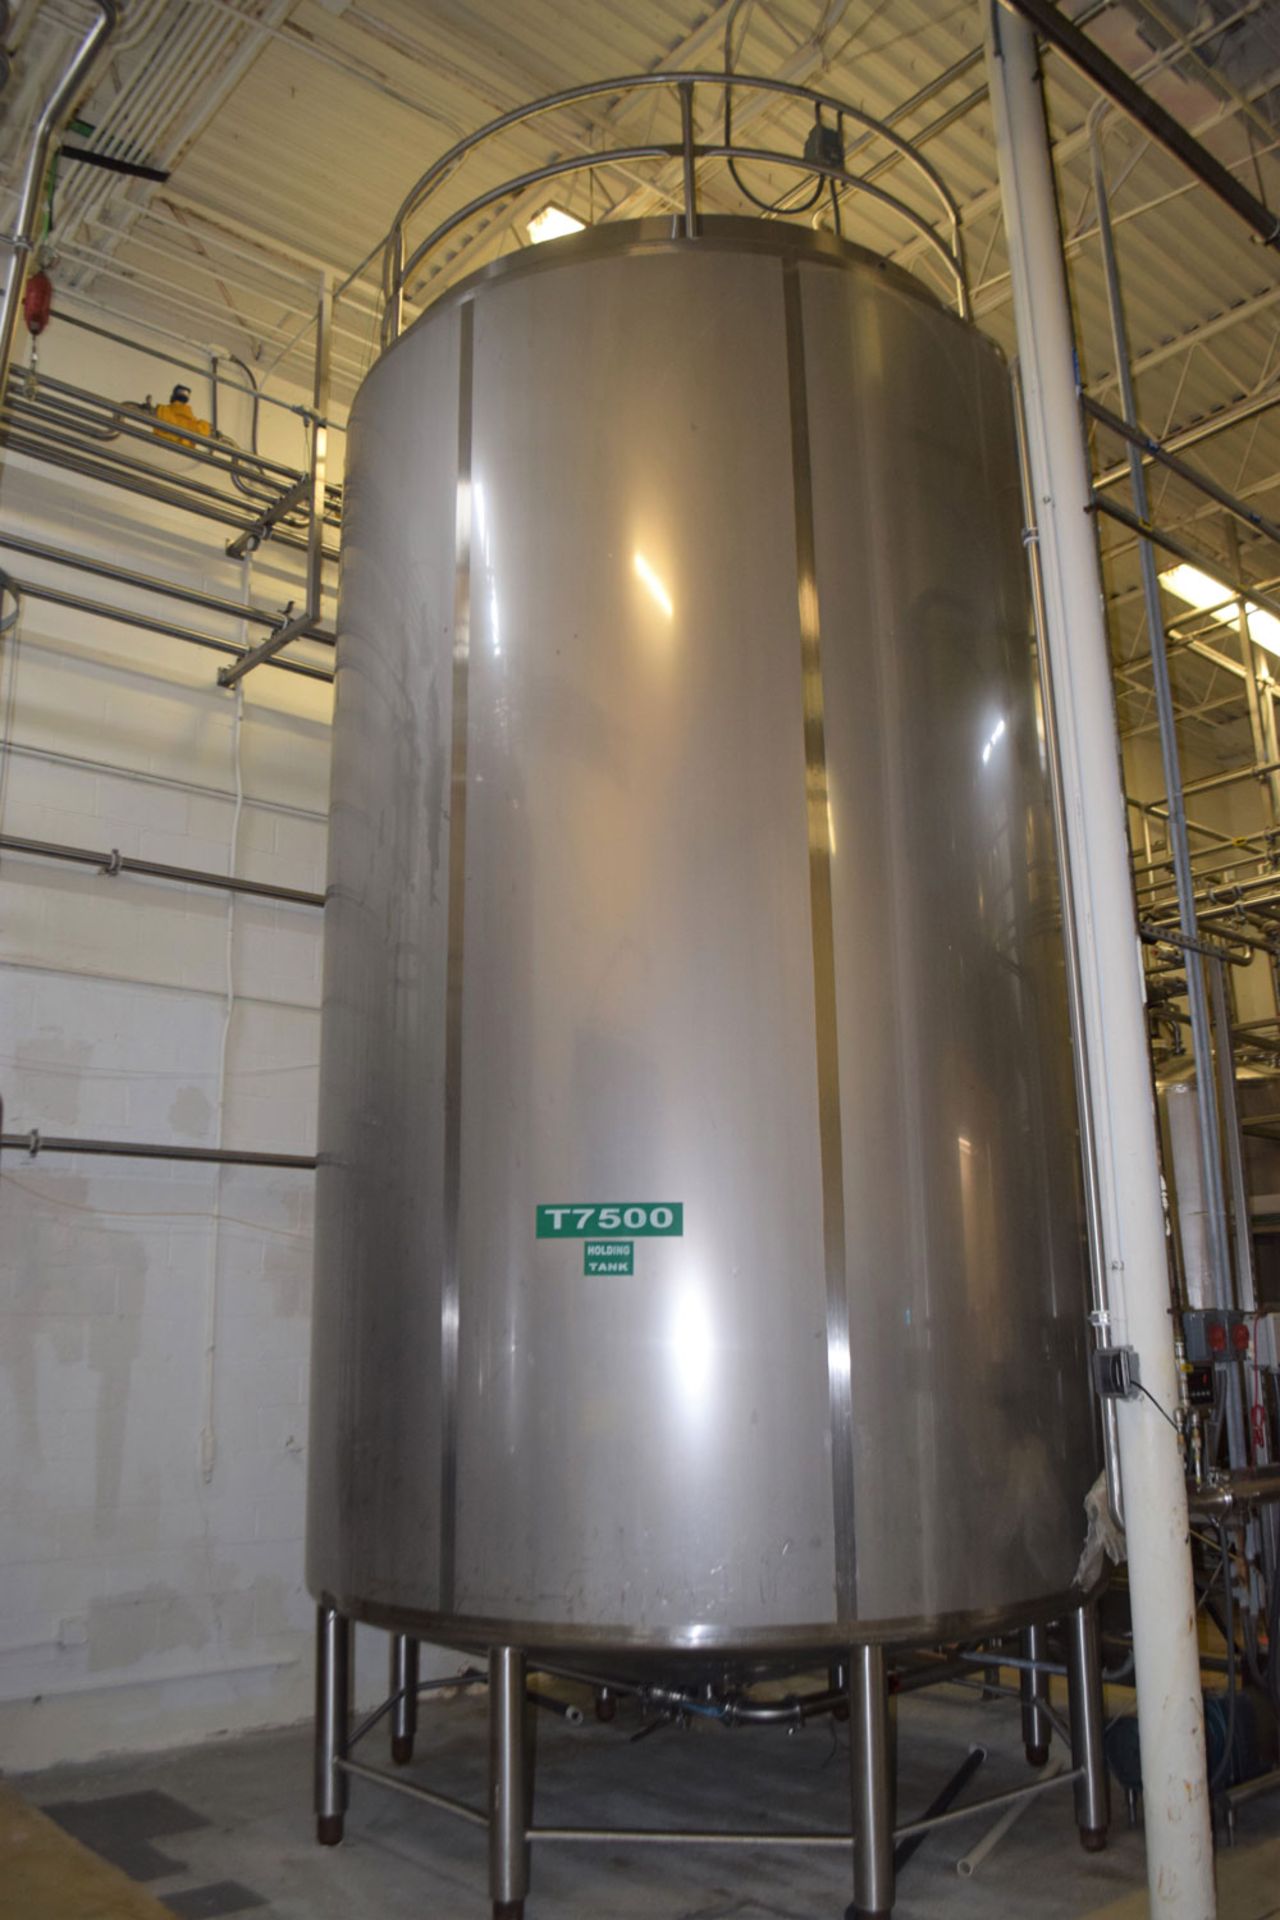 7,500 Gallon Capacity, Feldmeier E115107 Stainless Steel, Vertical, Jacketed Mixing Tank, Closed - Image 2 of 9